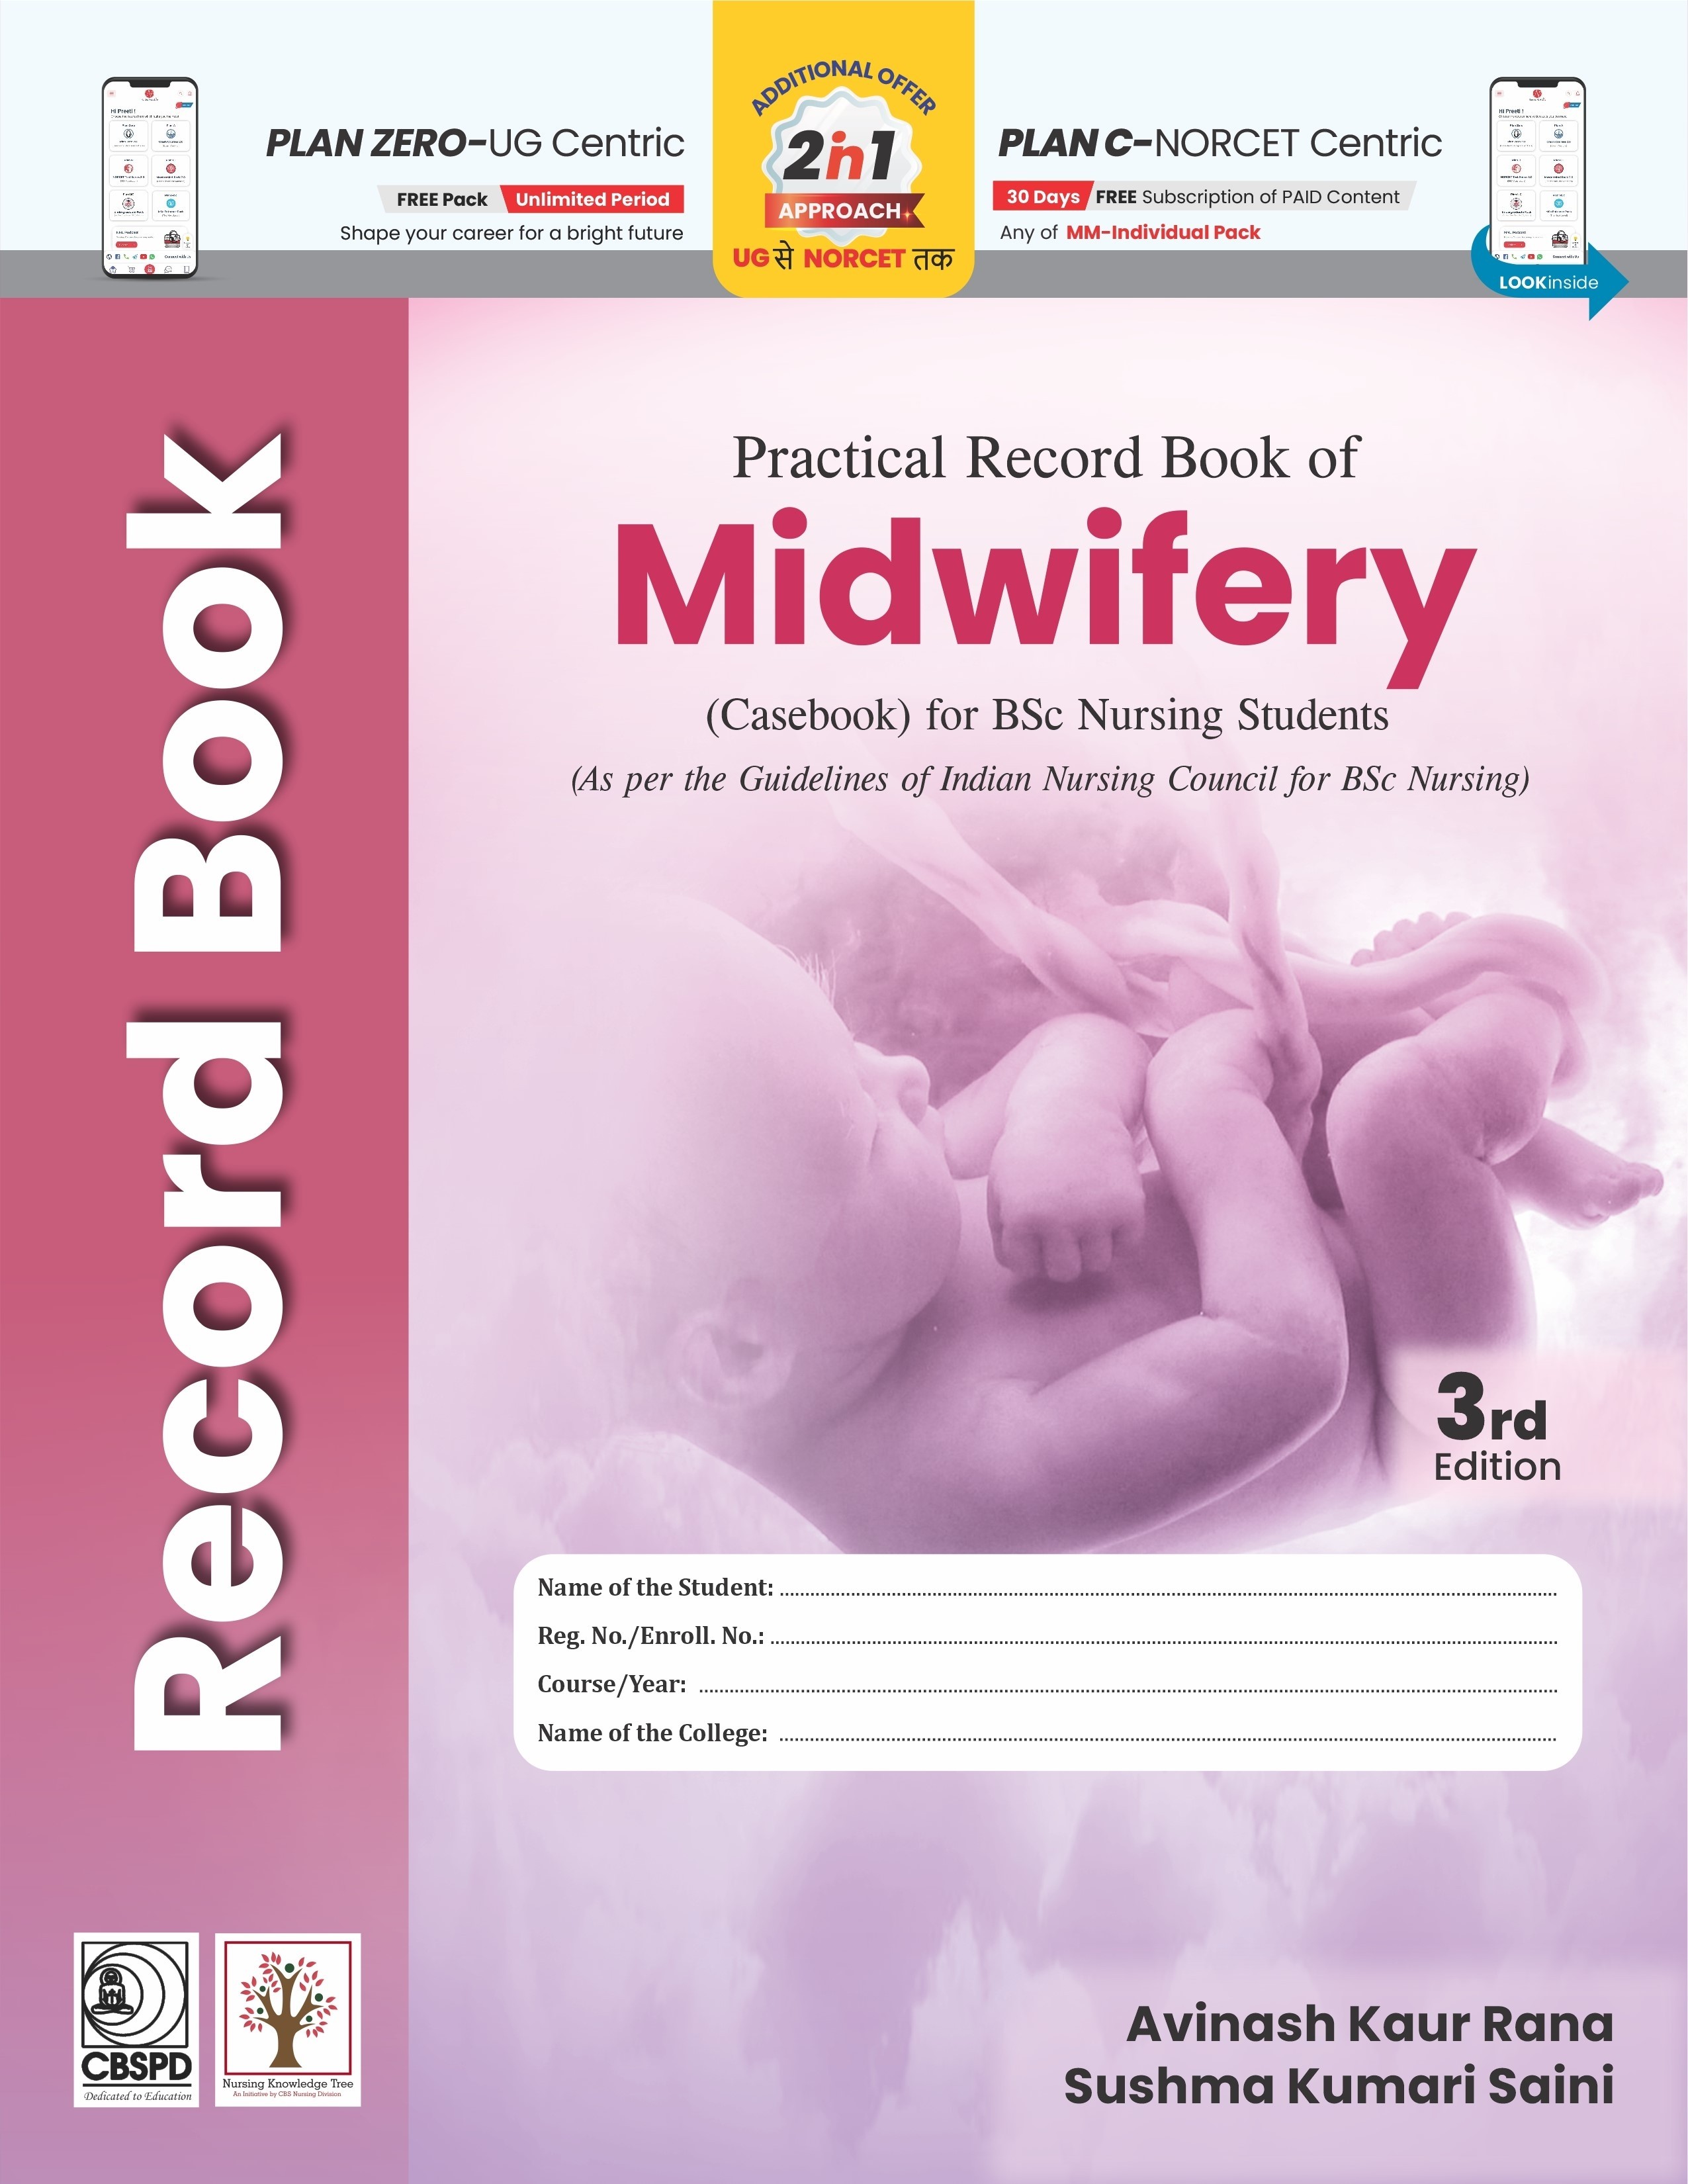 Practical Record book of Midwifery (Casebook) for BSc Nursing Students, 3rd Ed.